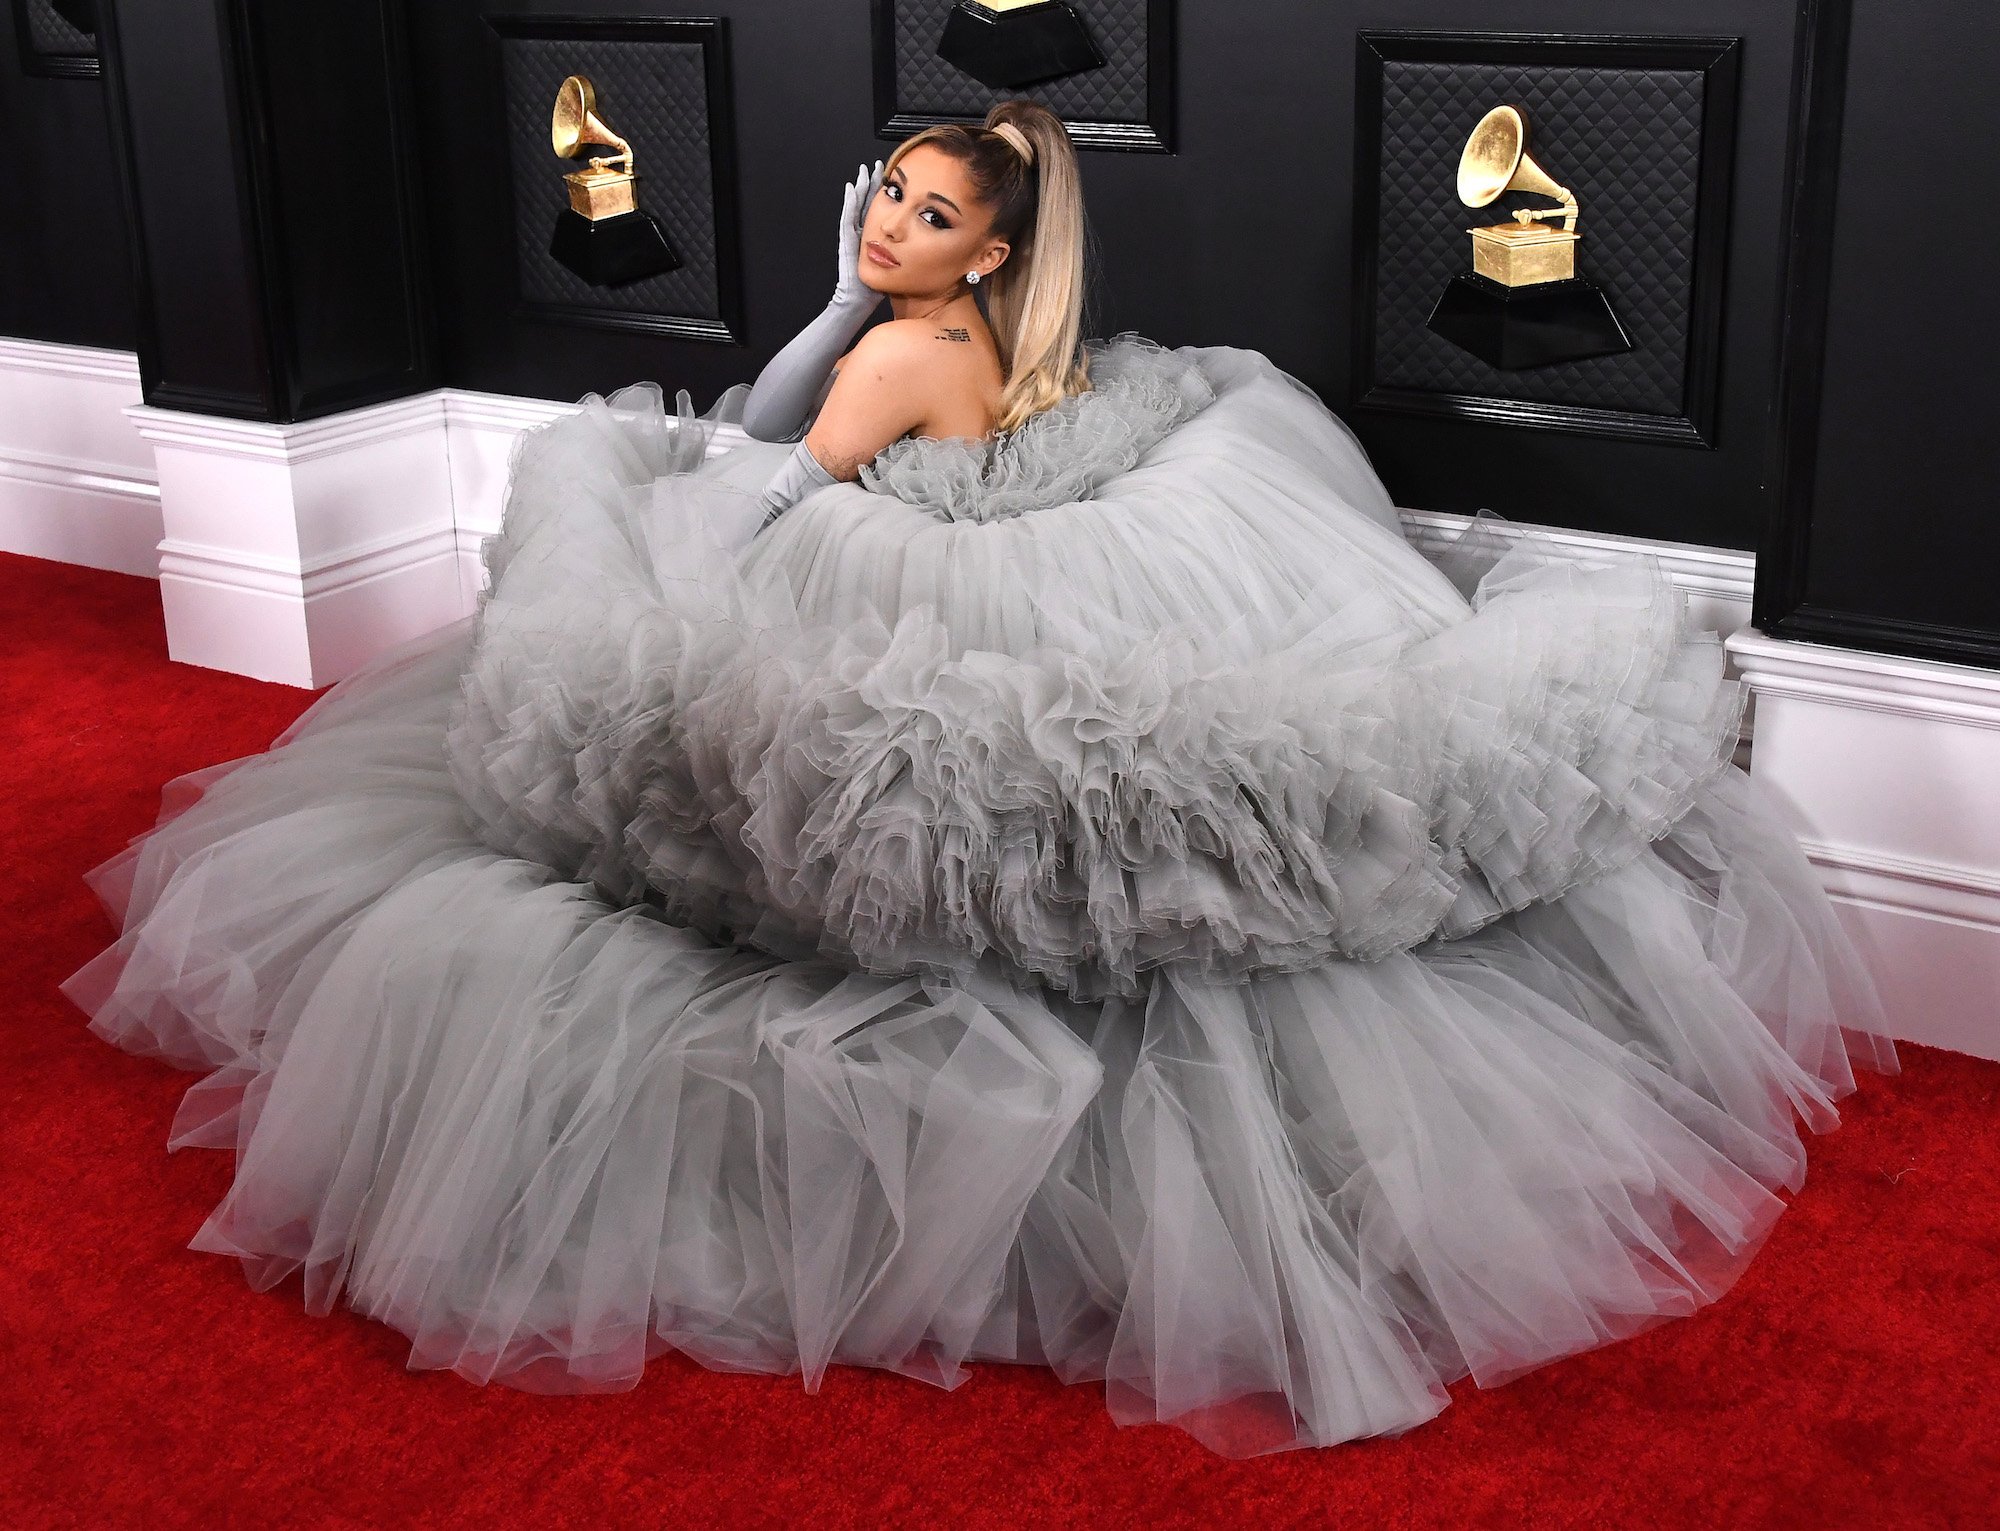 Ariana Grande crouched on the red carpet in a gray dress